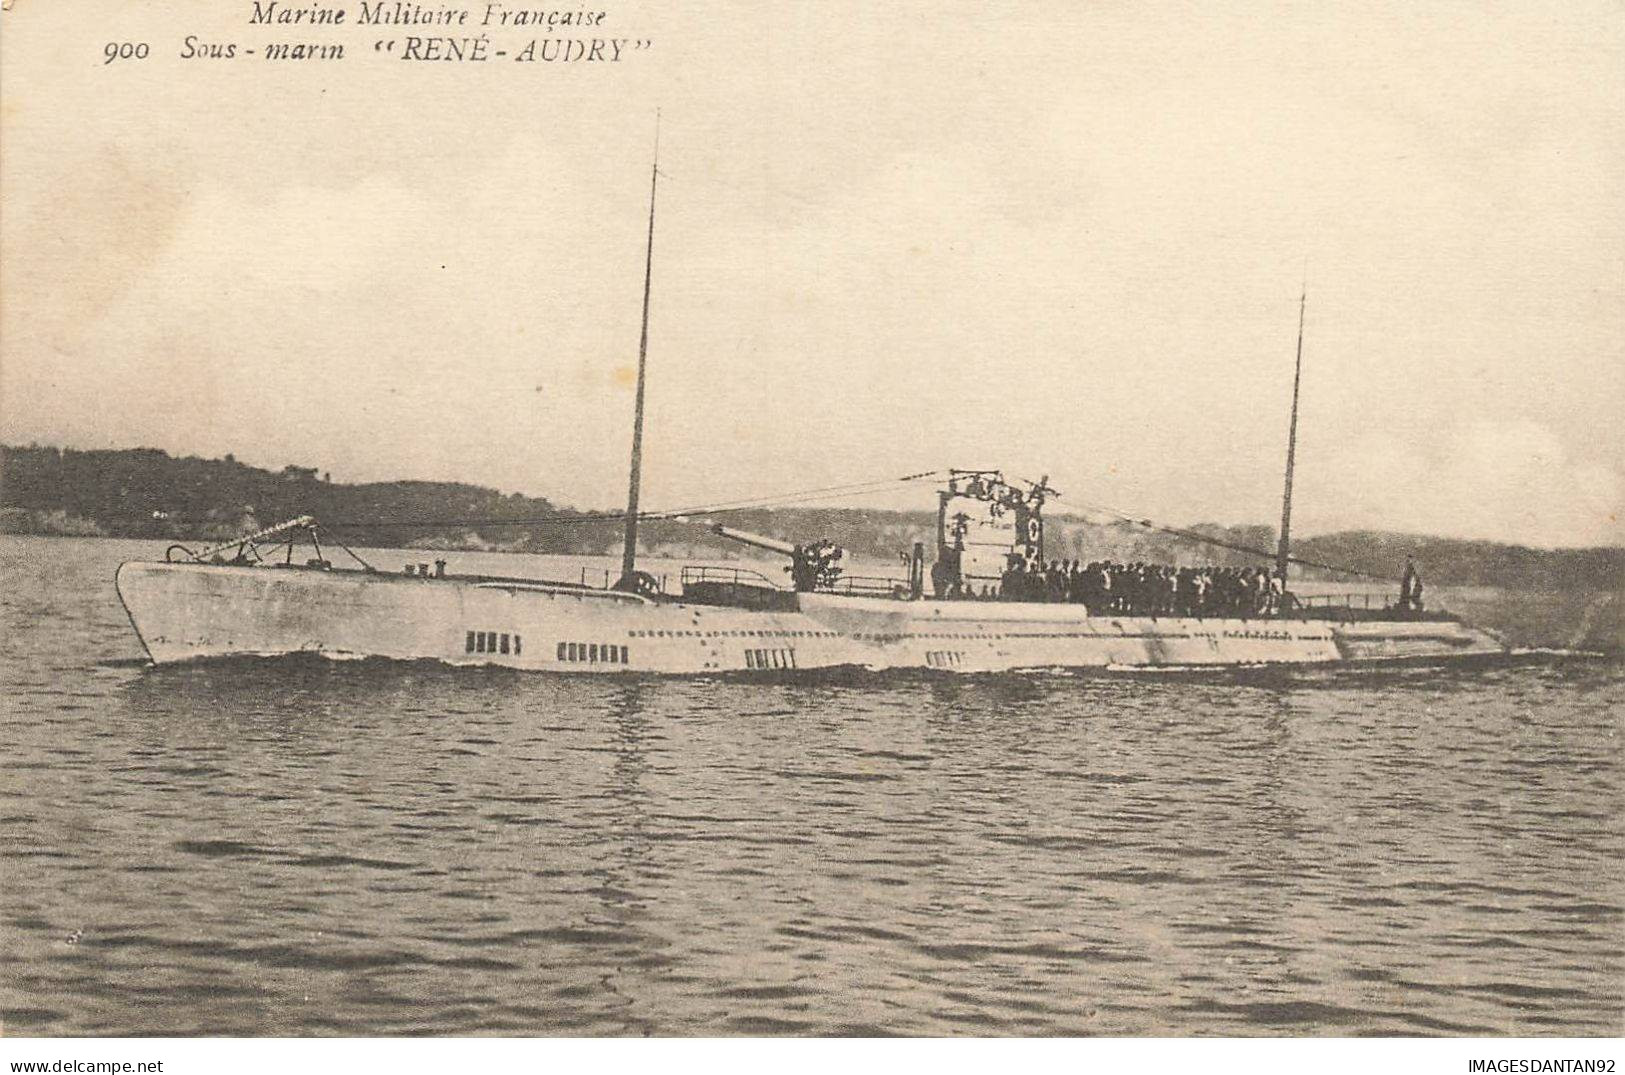 BATEAUX #MK45958 SOUS MARIN RENE AUDRY MARINE MILITAIRE FRANCAISE - Unterseeboote